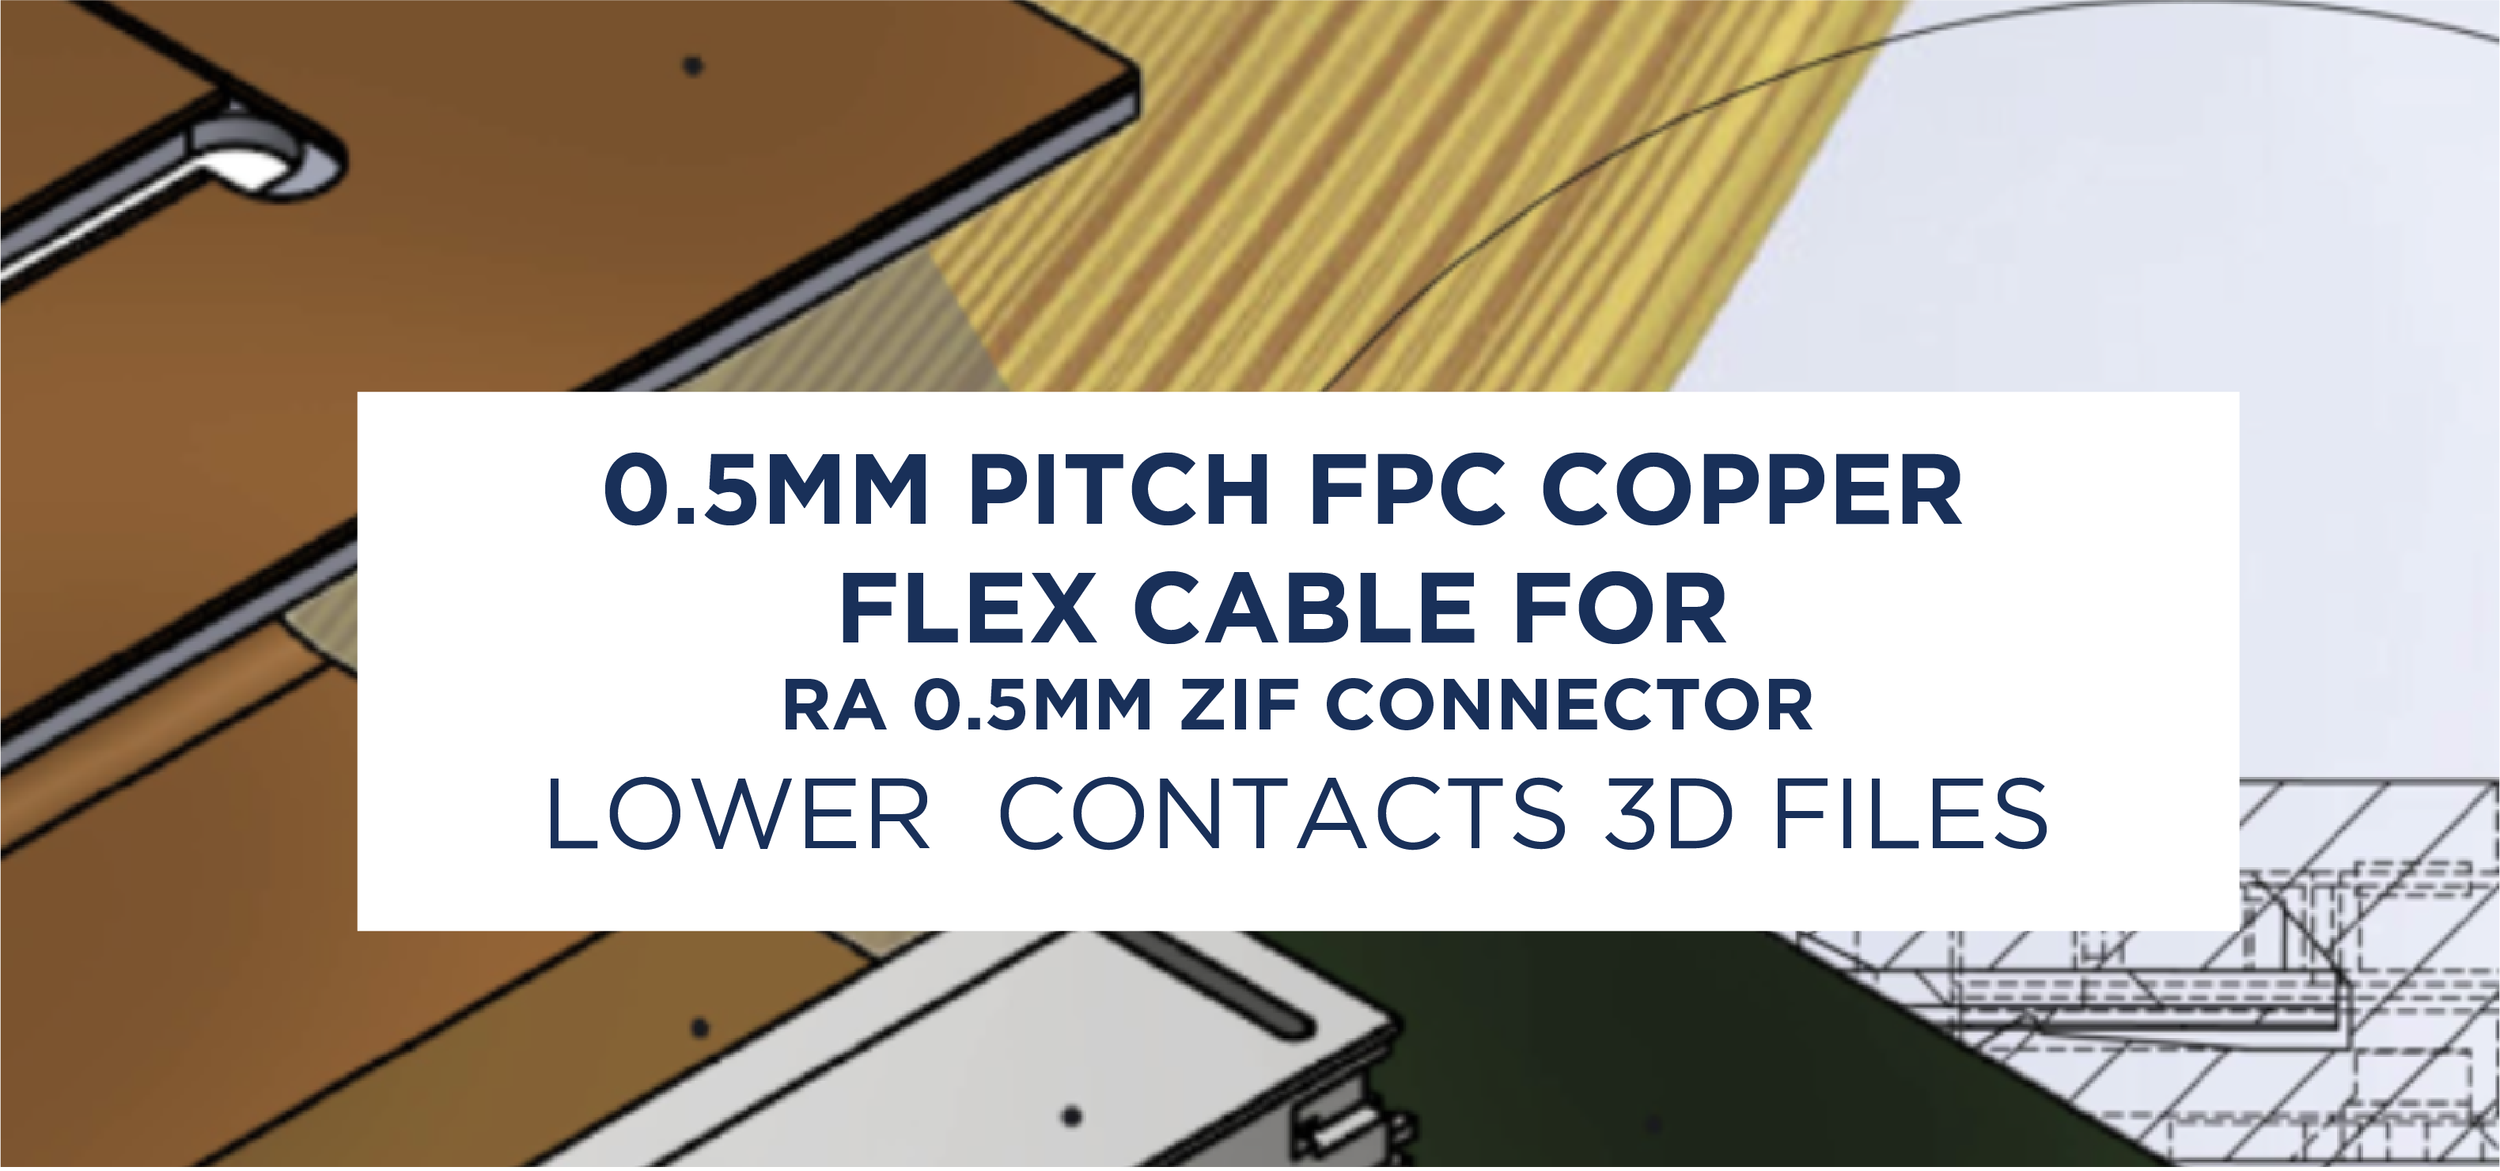 0.5MM PITCH FPC RA ZIF BOTTOM CONNECTOR 3D FILES